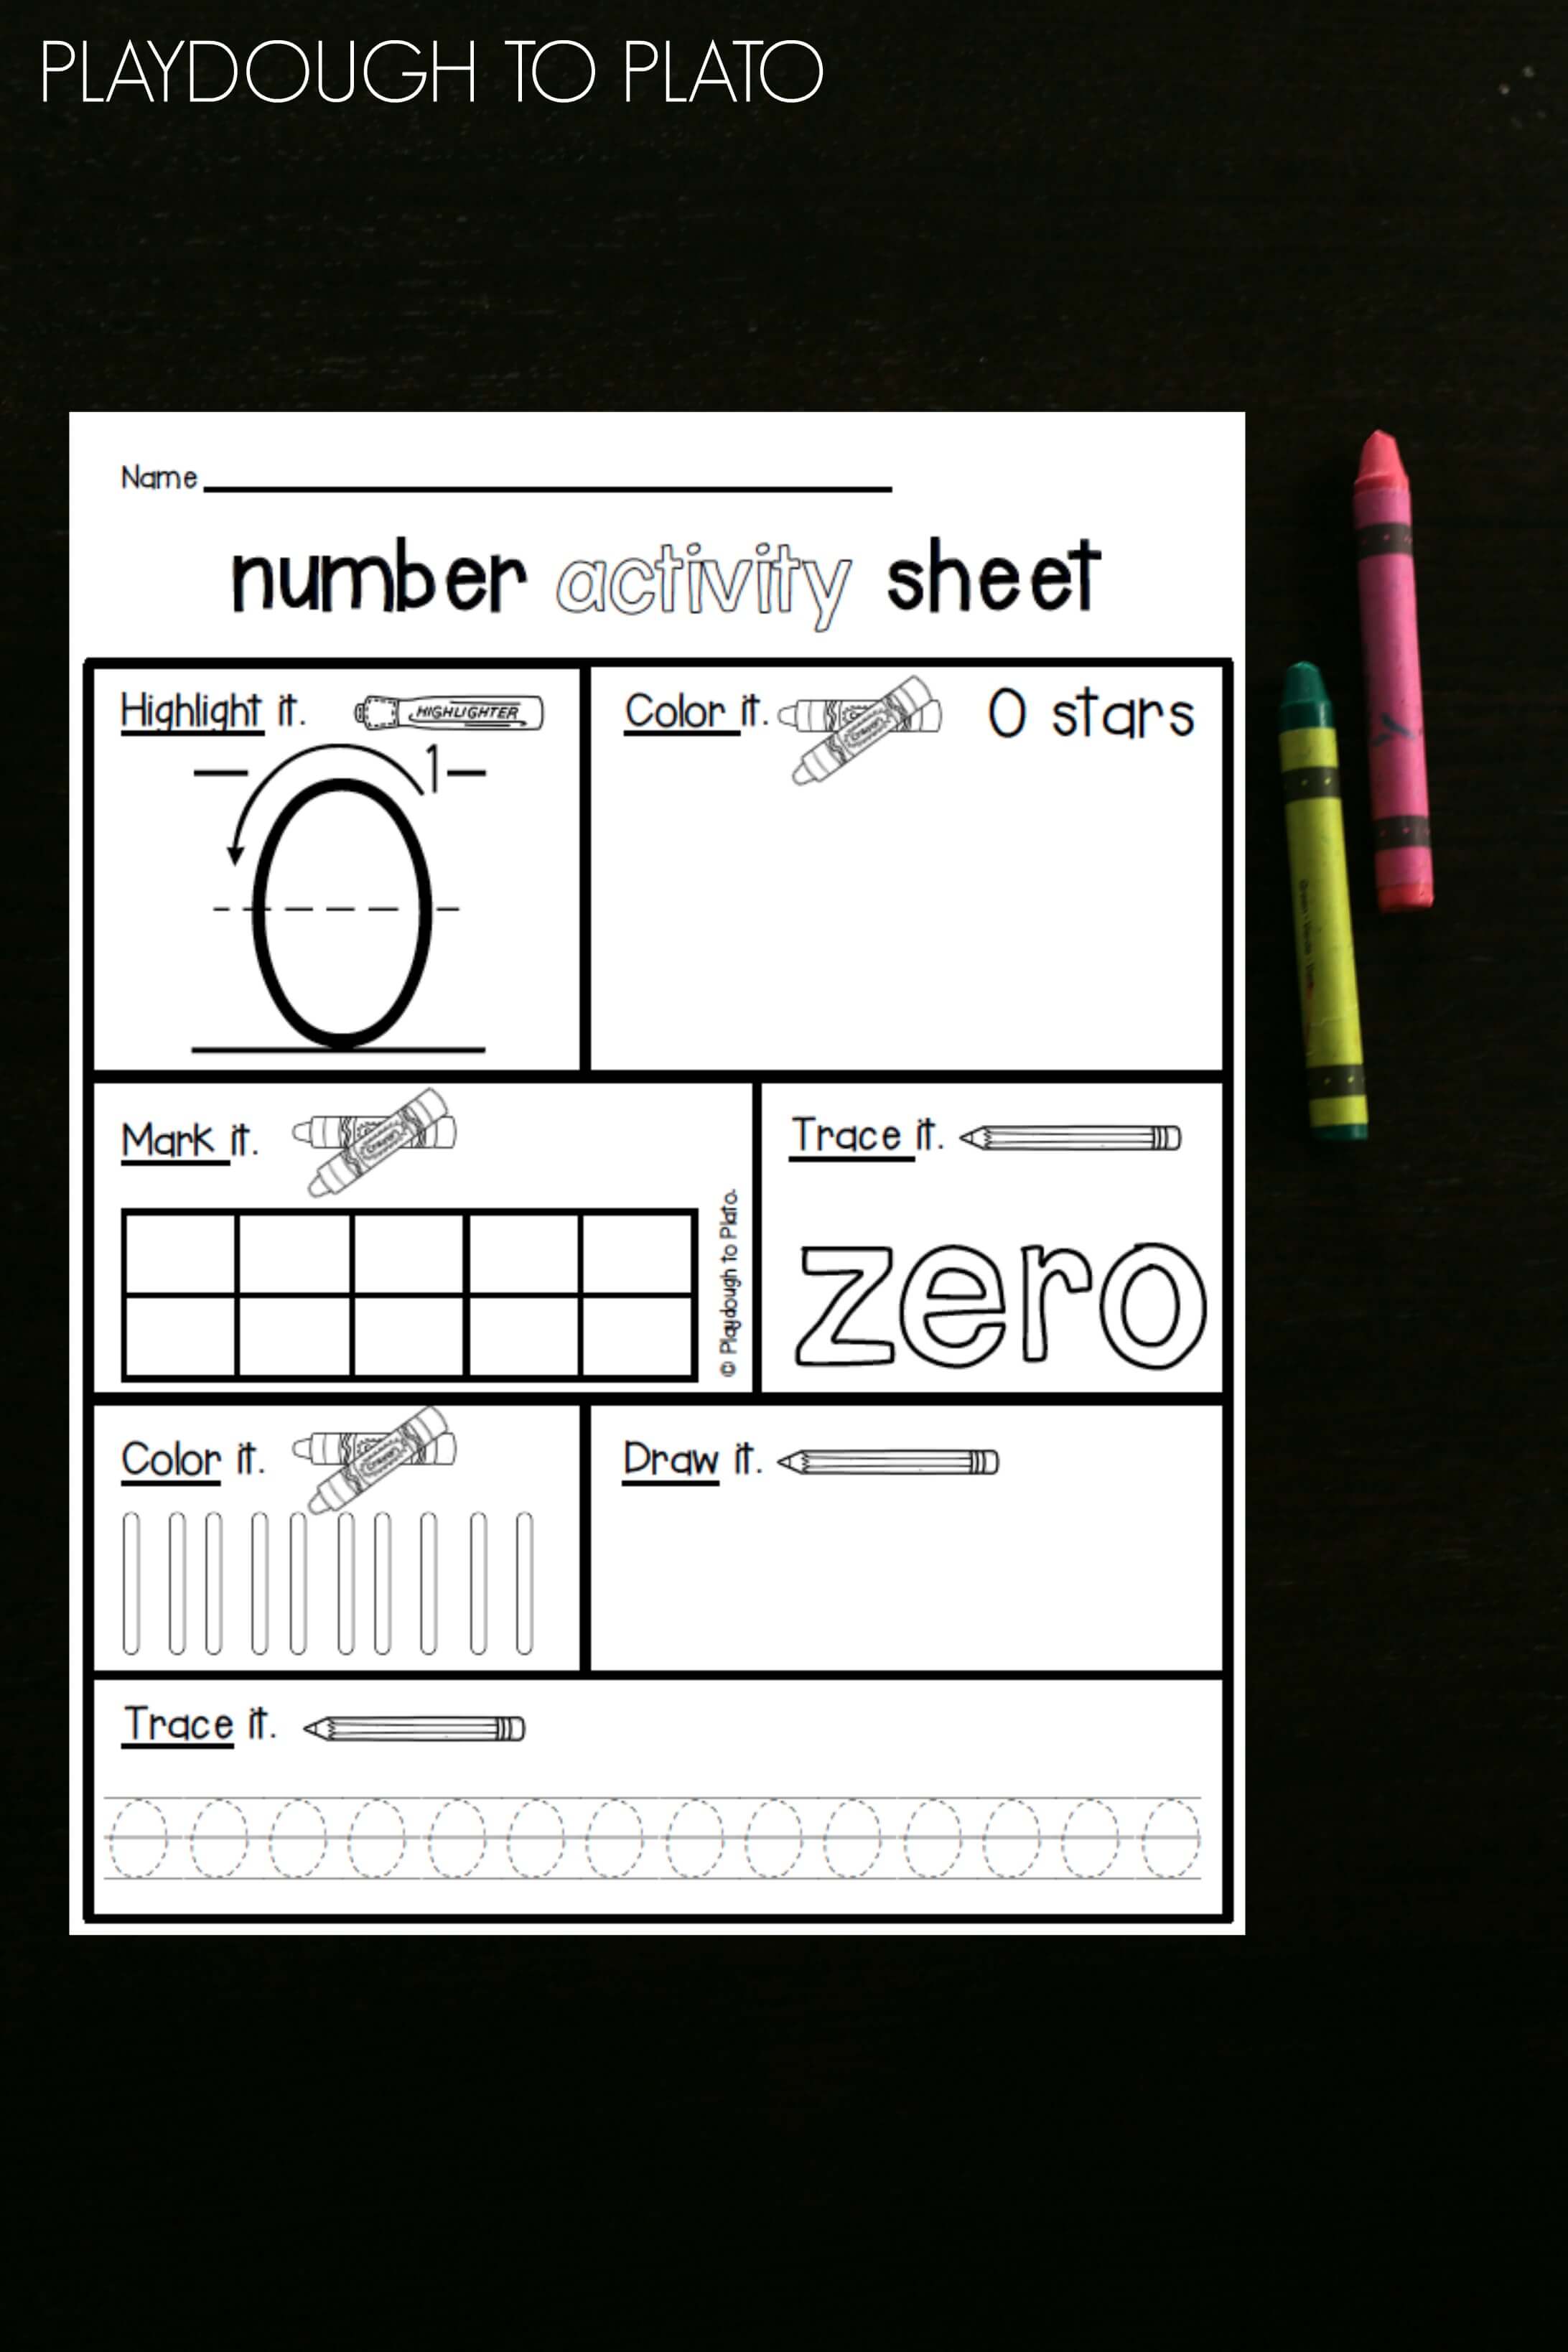 Number Activity Sheets - Playdough To Plato